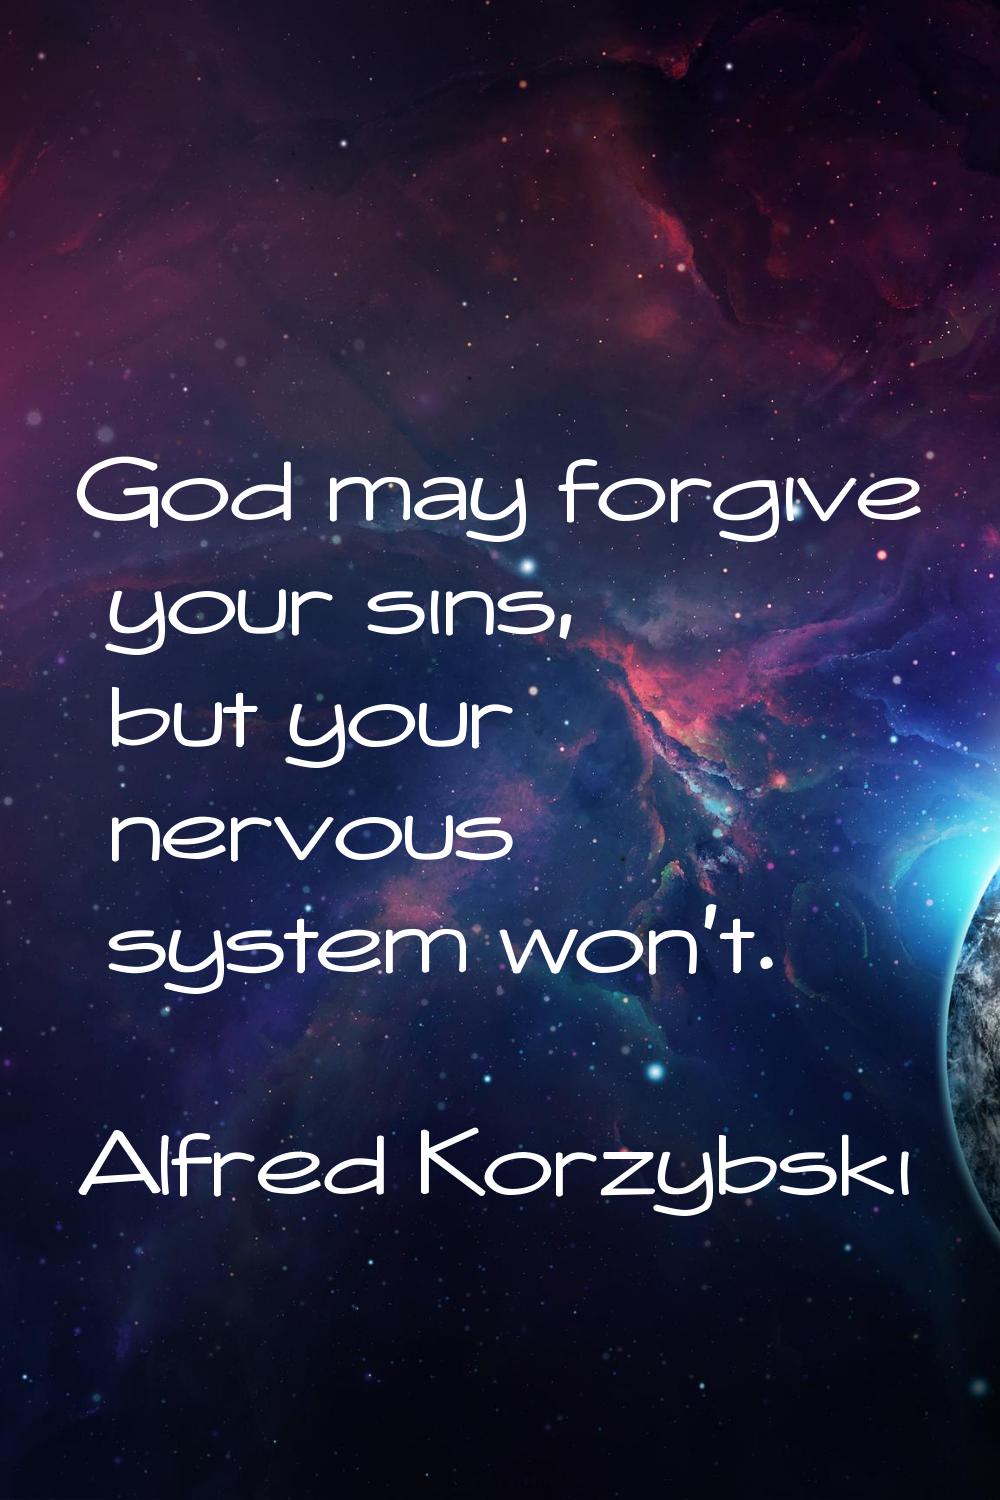 God may forgive your sins, but your nervous system won't.